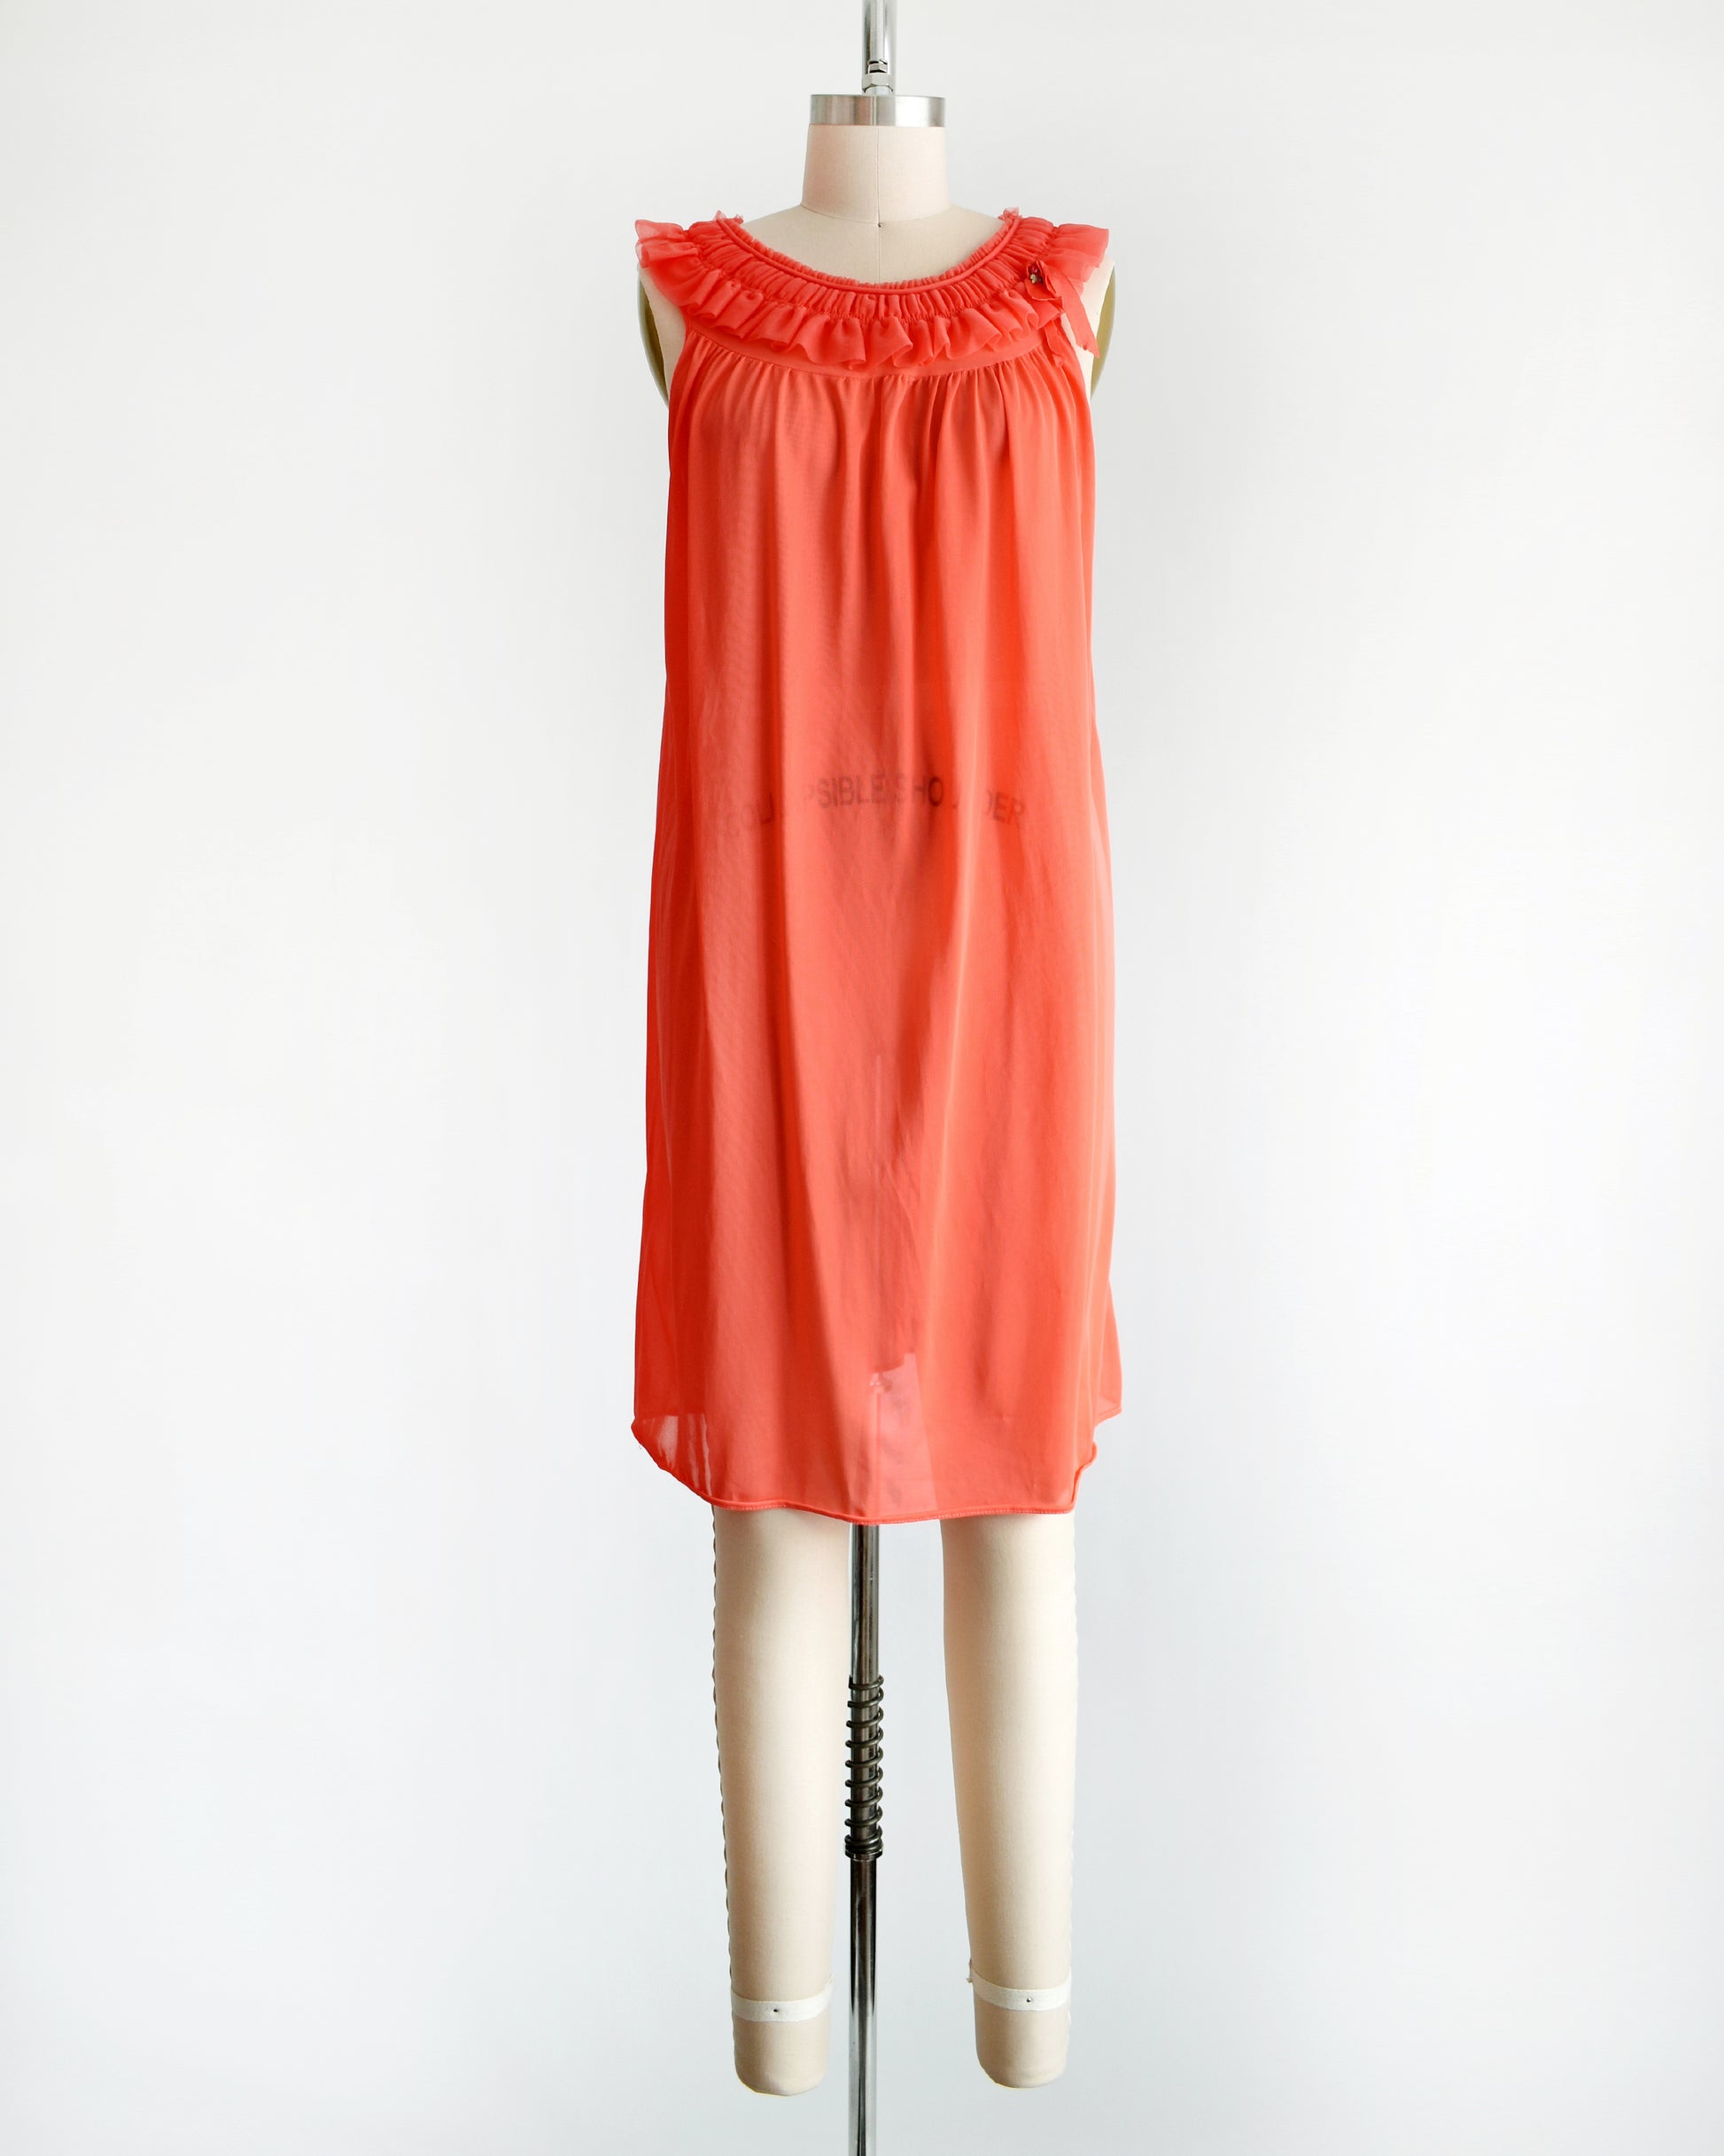 a vintage 1960s/1970s hot coral ruffle nightie that has a ruffled neckline